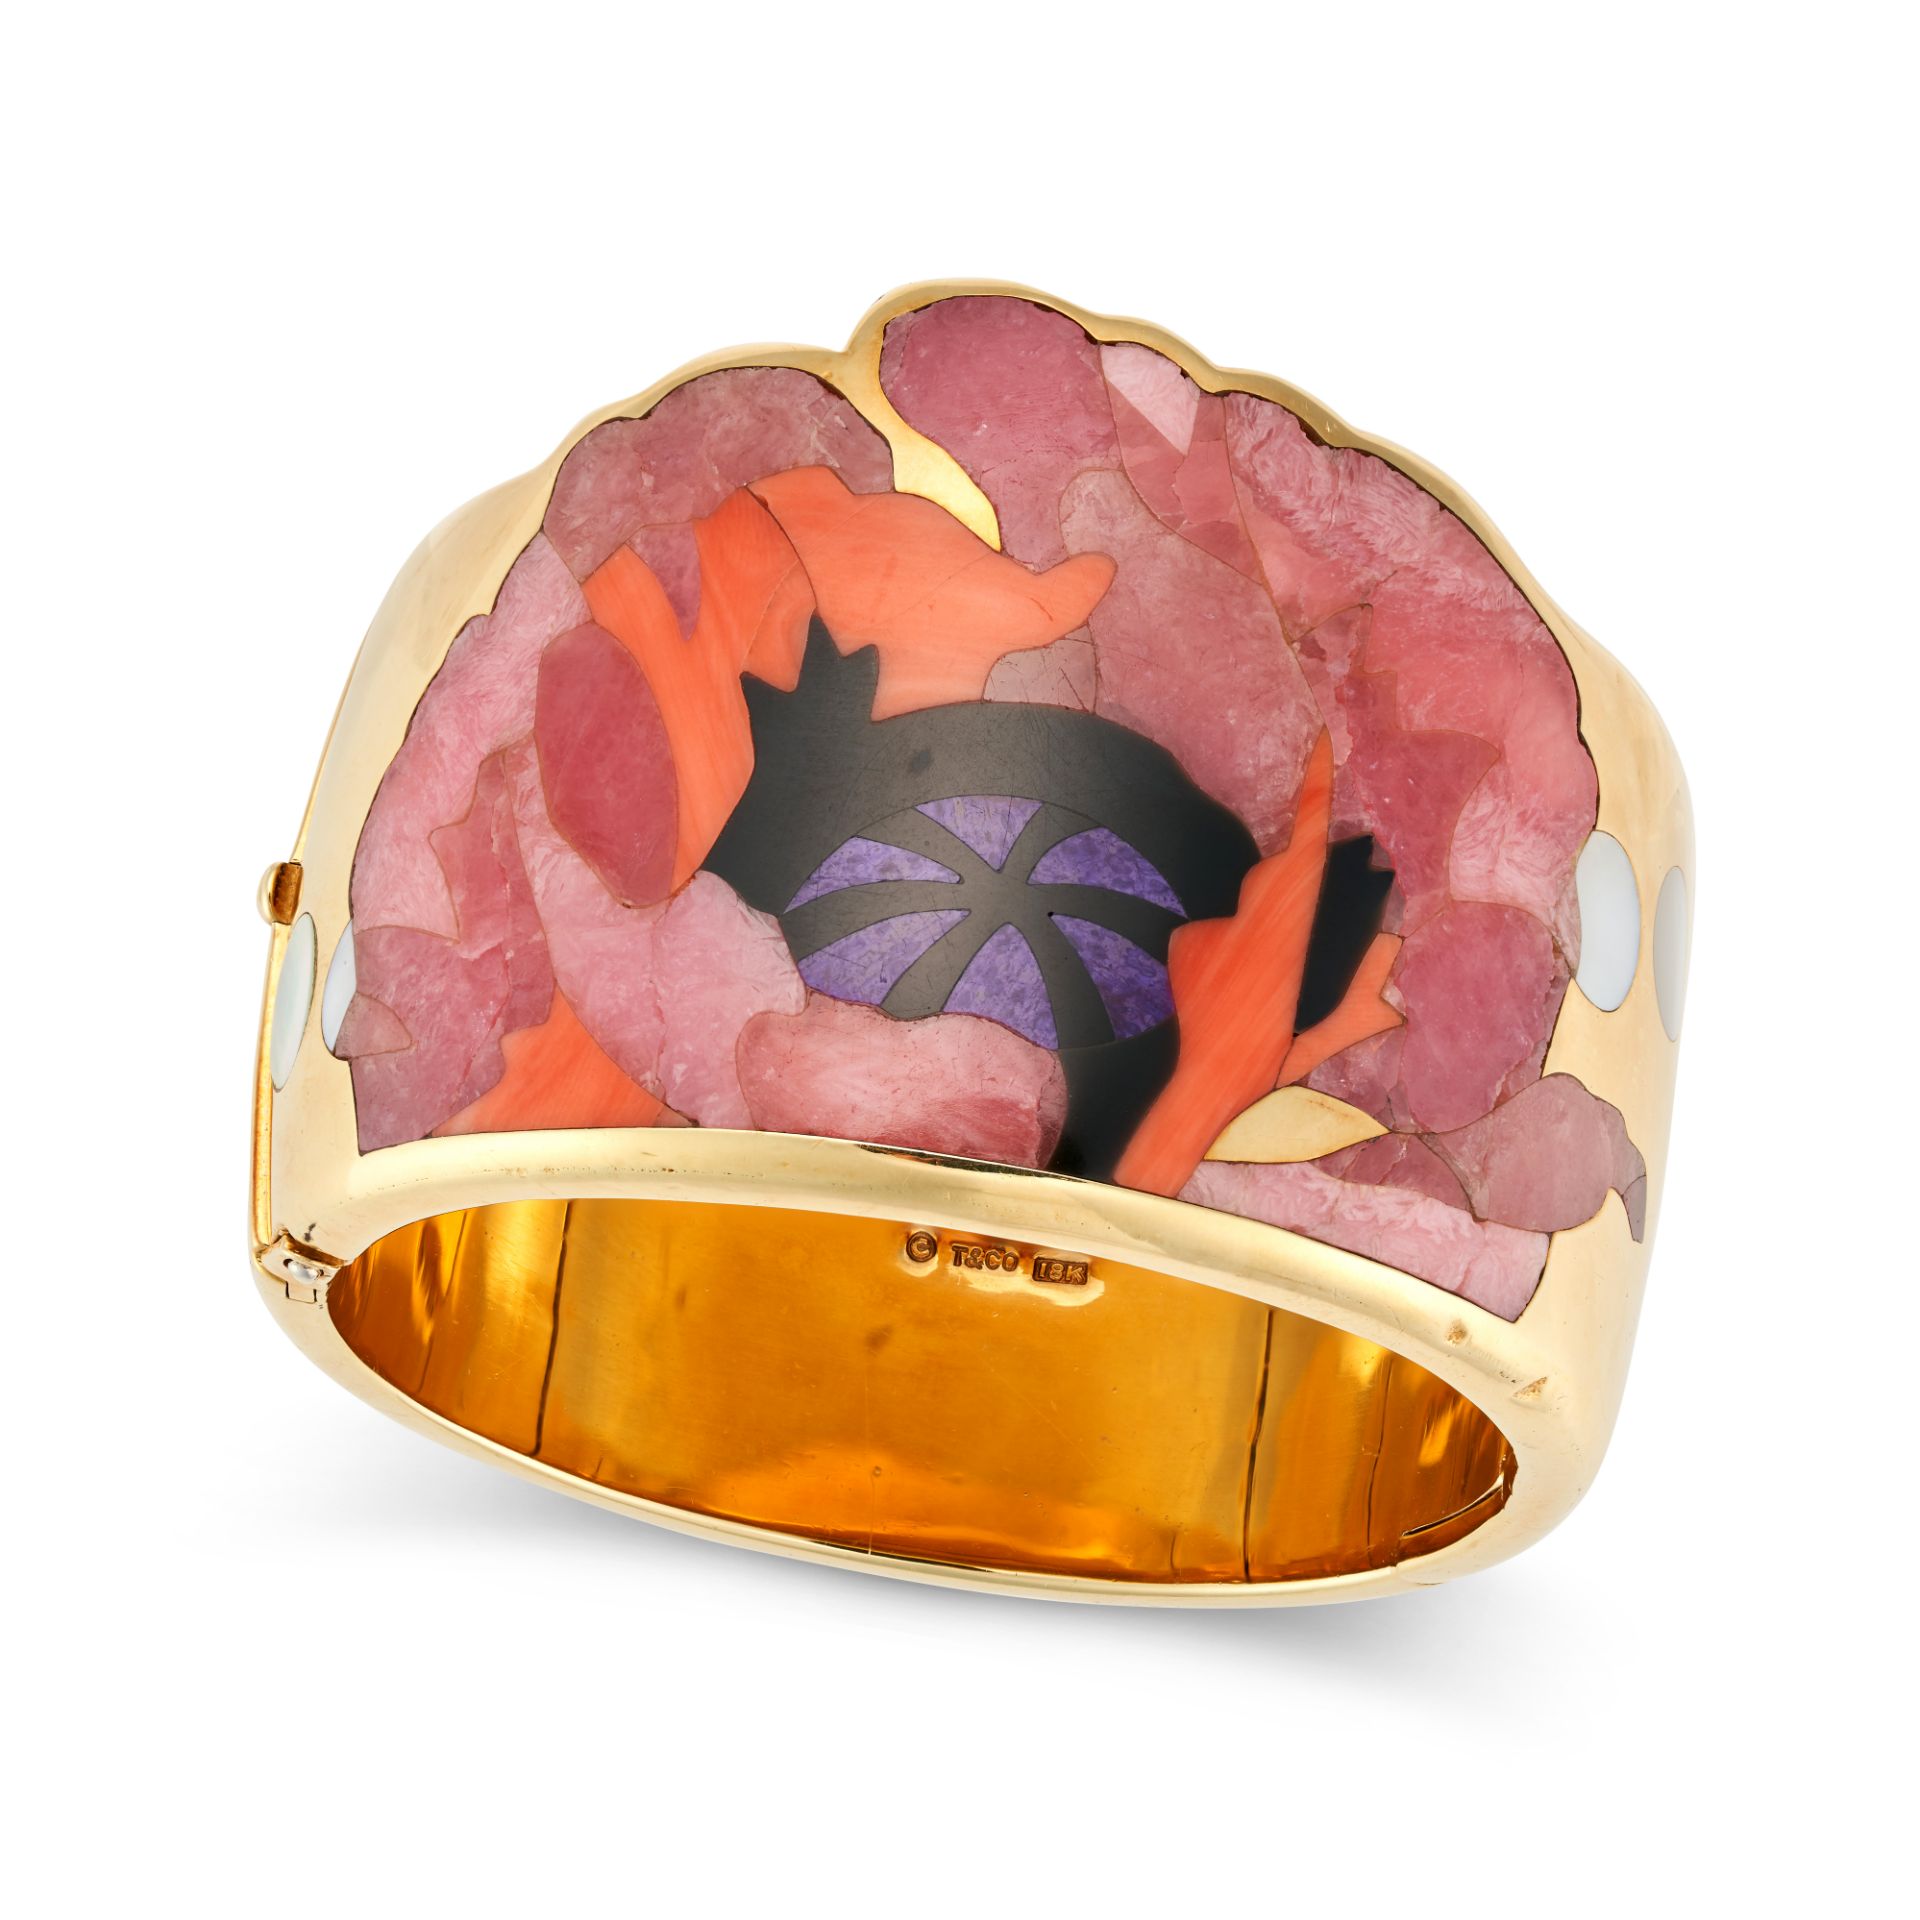 ANGELA CUMMINGS FOR TIFFANY & CO., A RHODOCHROSITE, CORAL, MOTHER OF PEARL AND JADE POPPY BANGLE ... - Bild 2 aus 3